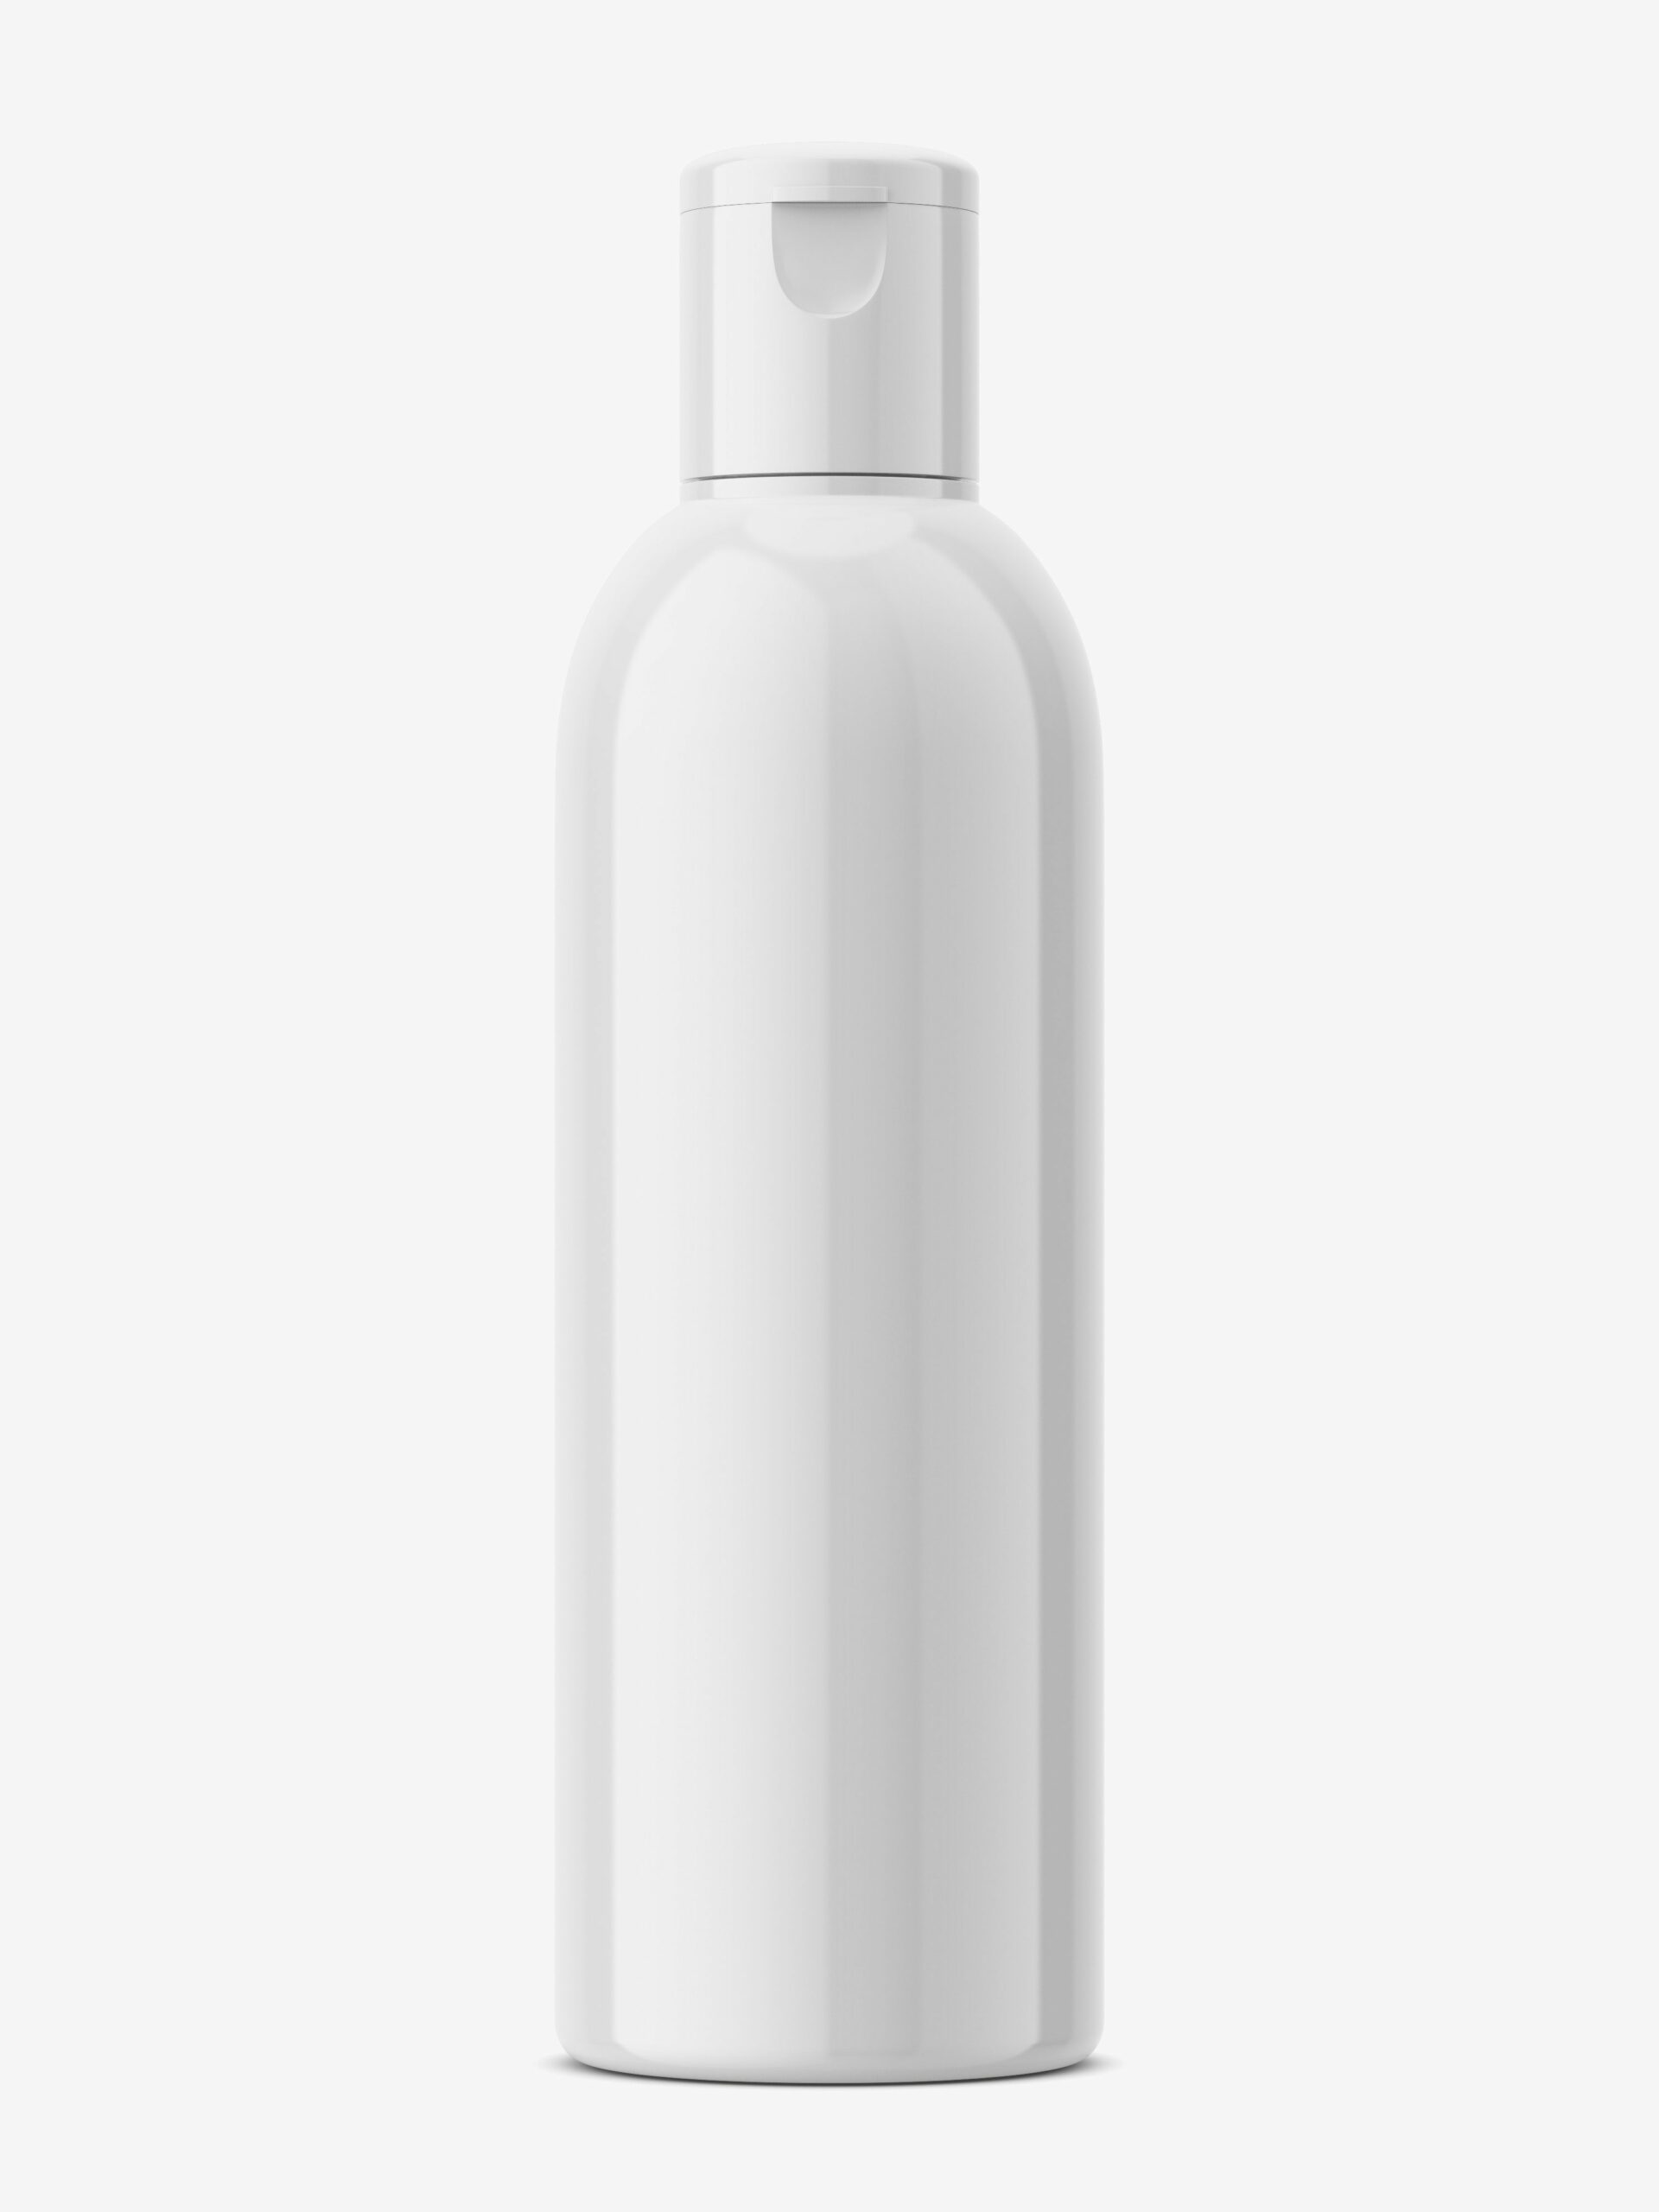 Download Yellowimages Mockups Glossy Plastic Syrup Bottle Mockup Png Yellowimages Mockups